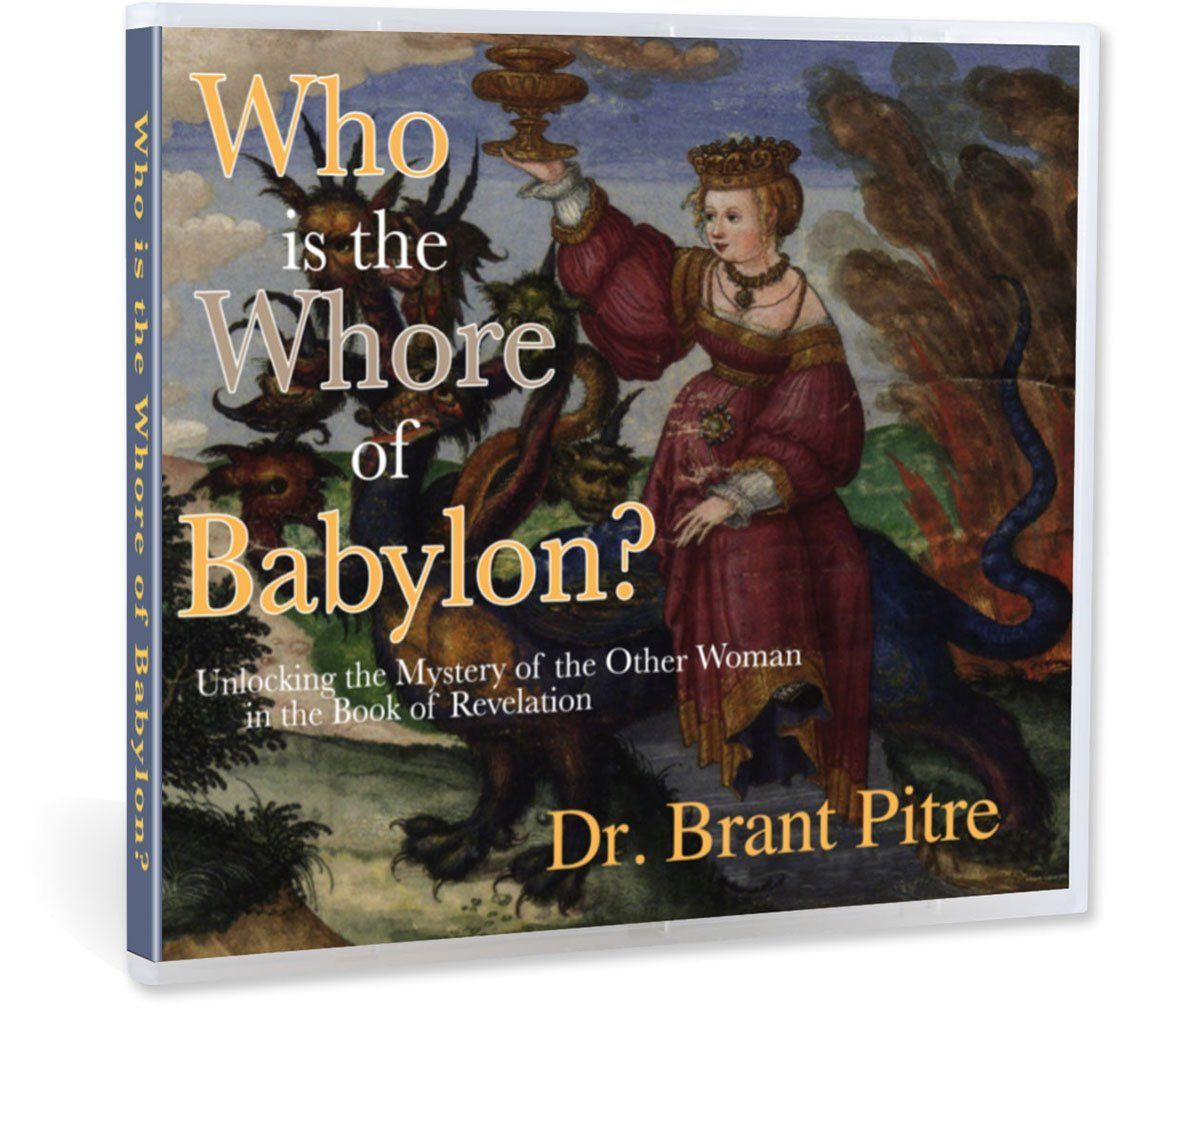 Who is the famous "Whore of Babylon" in the book of revelation?  Many protestants claim it's the Roman Catholic Church or the city of Rome, but is that what Saint John himself says in the book of Revelation? (CD)